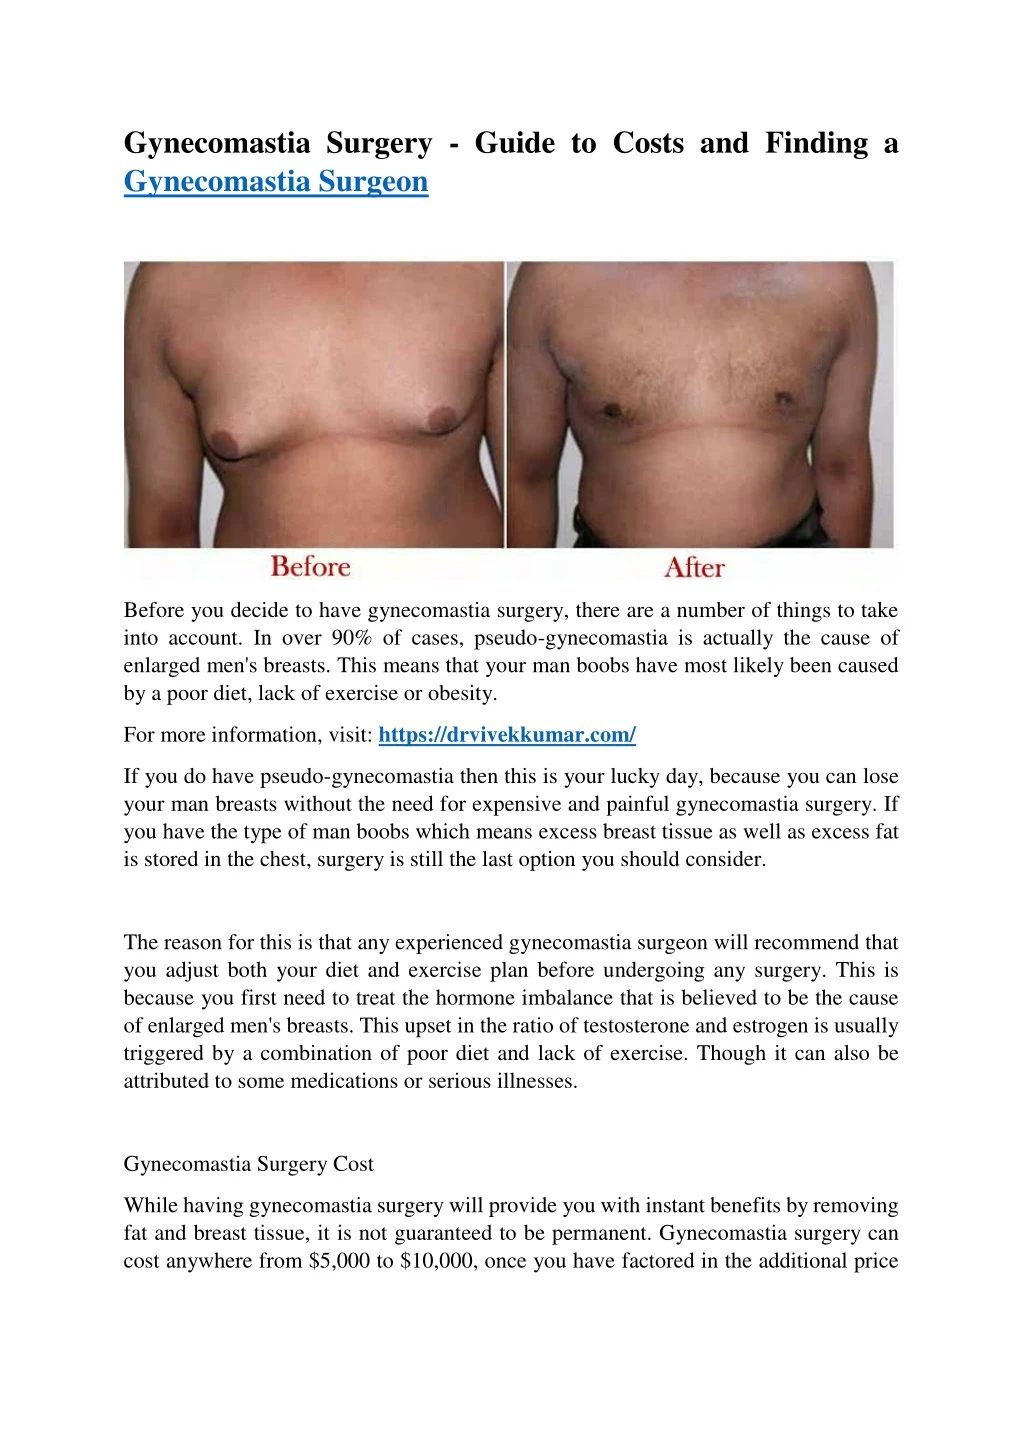 gynecomastia surgery guide to costs and finding